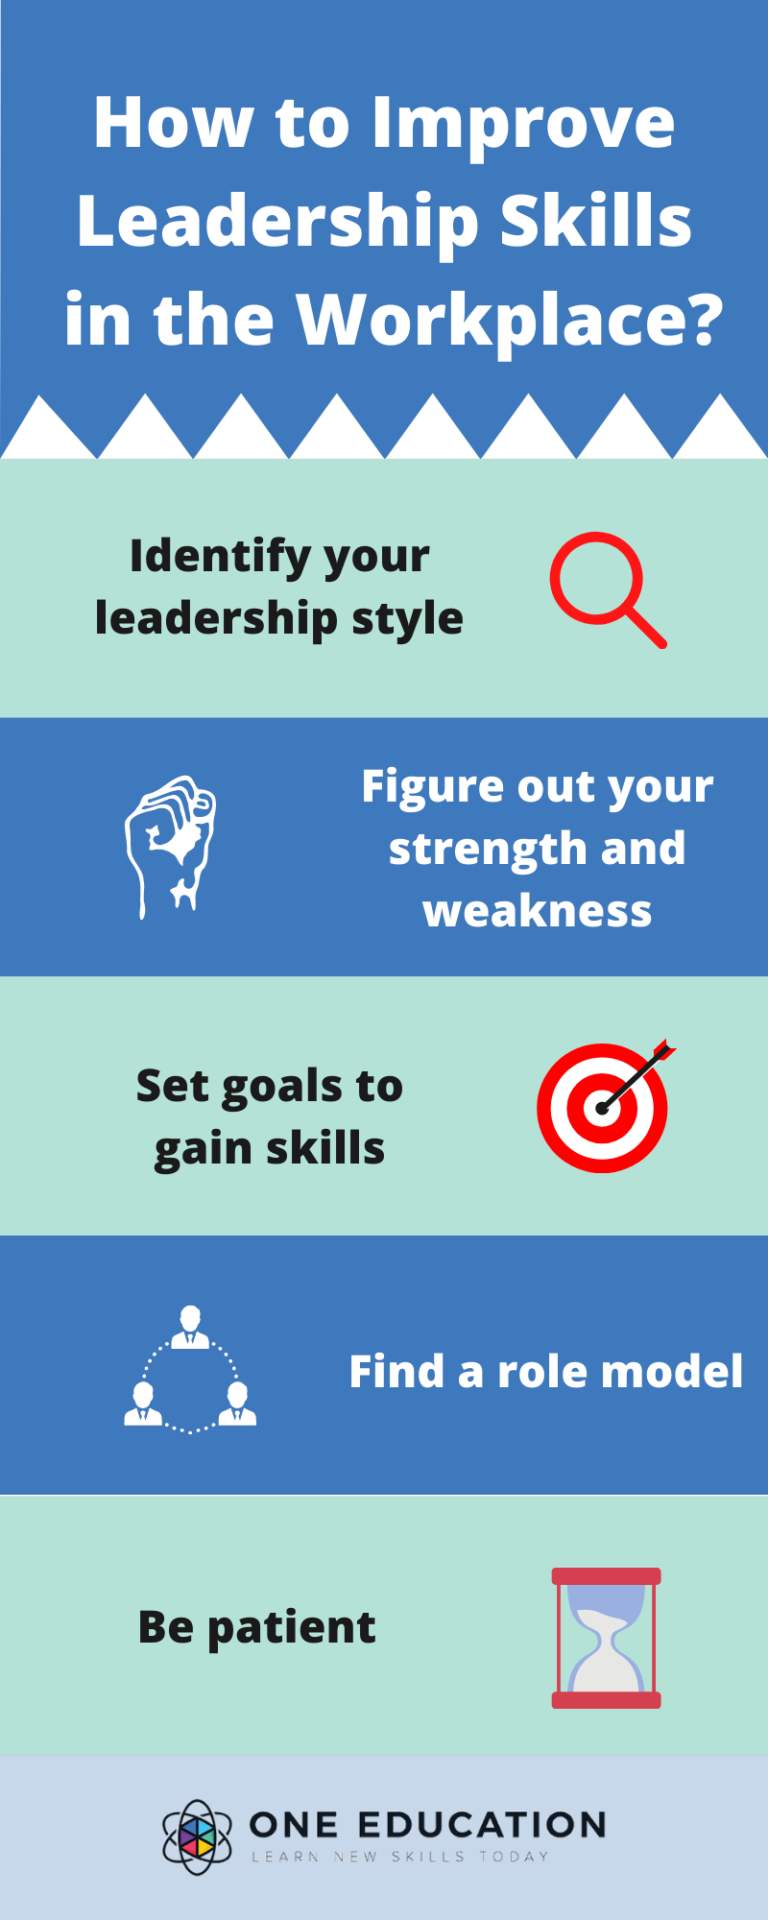 How to Improve Leadership Skills in the Workplace